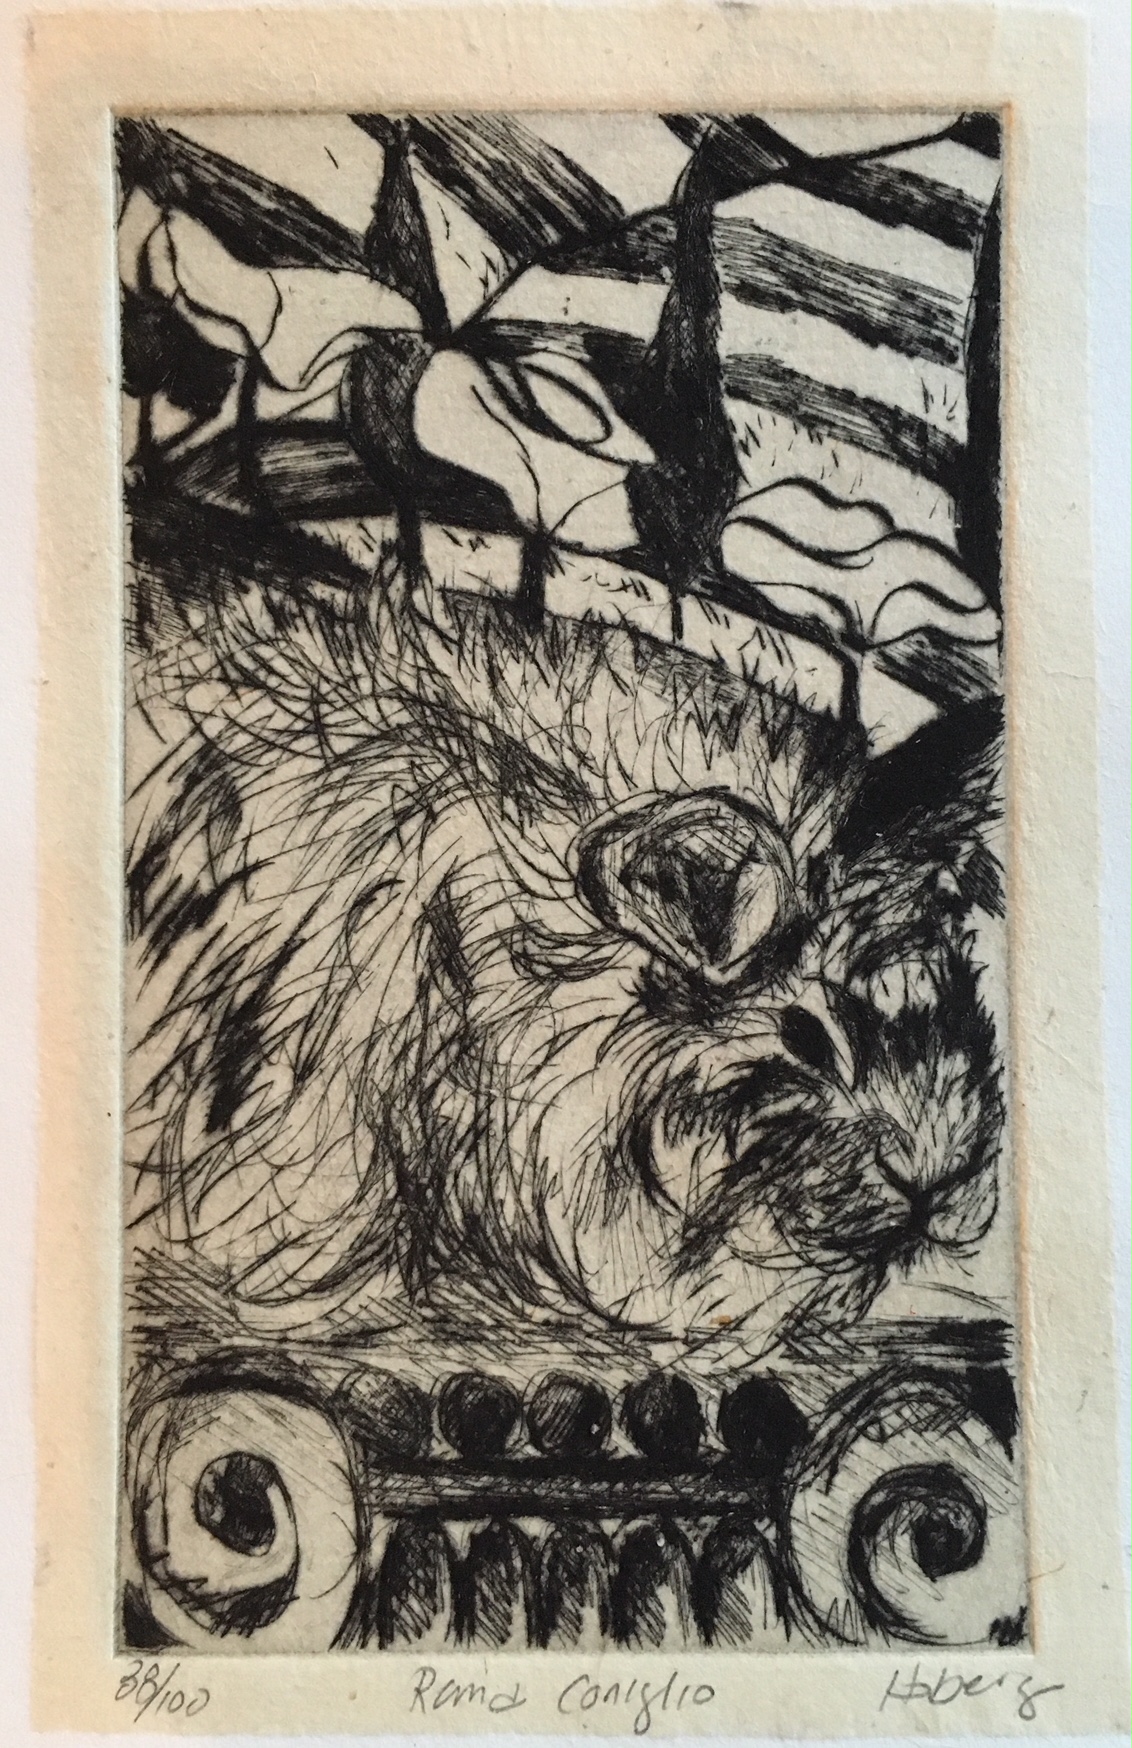 Jani Hoberg, Roma Coniglio (Rome Rabbit), drypoint with chine colle